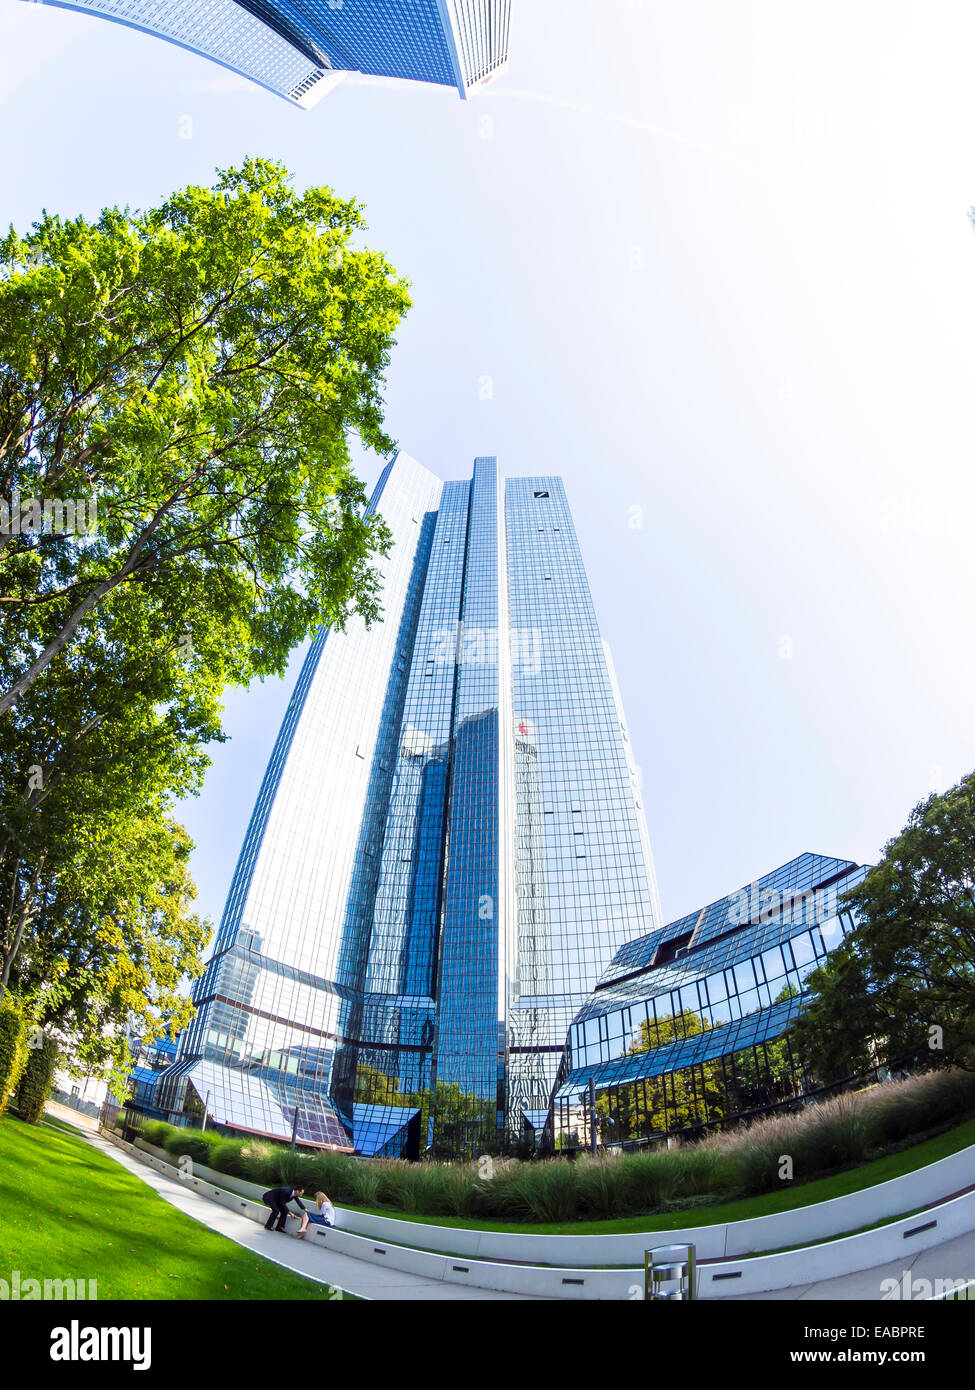 Germany Hesse Frankfurt Westend Opera Tower headquarters of UBS Bank Bank wide angle view Stock Photo